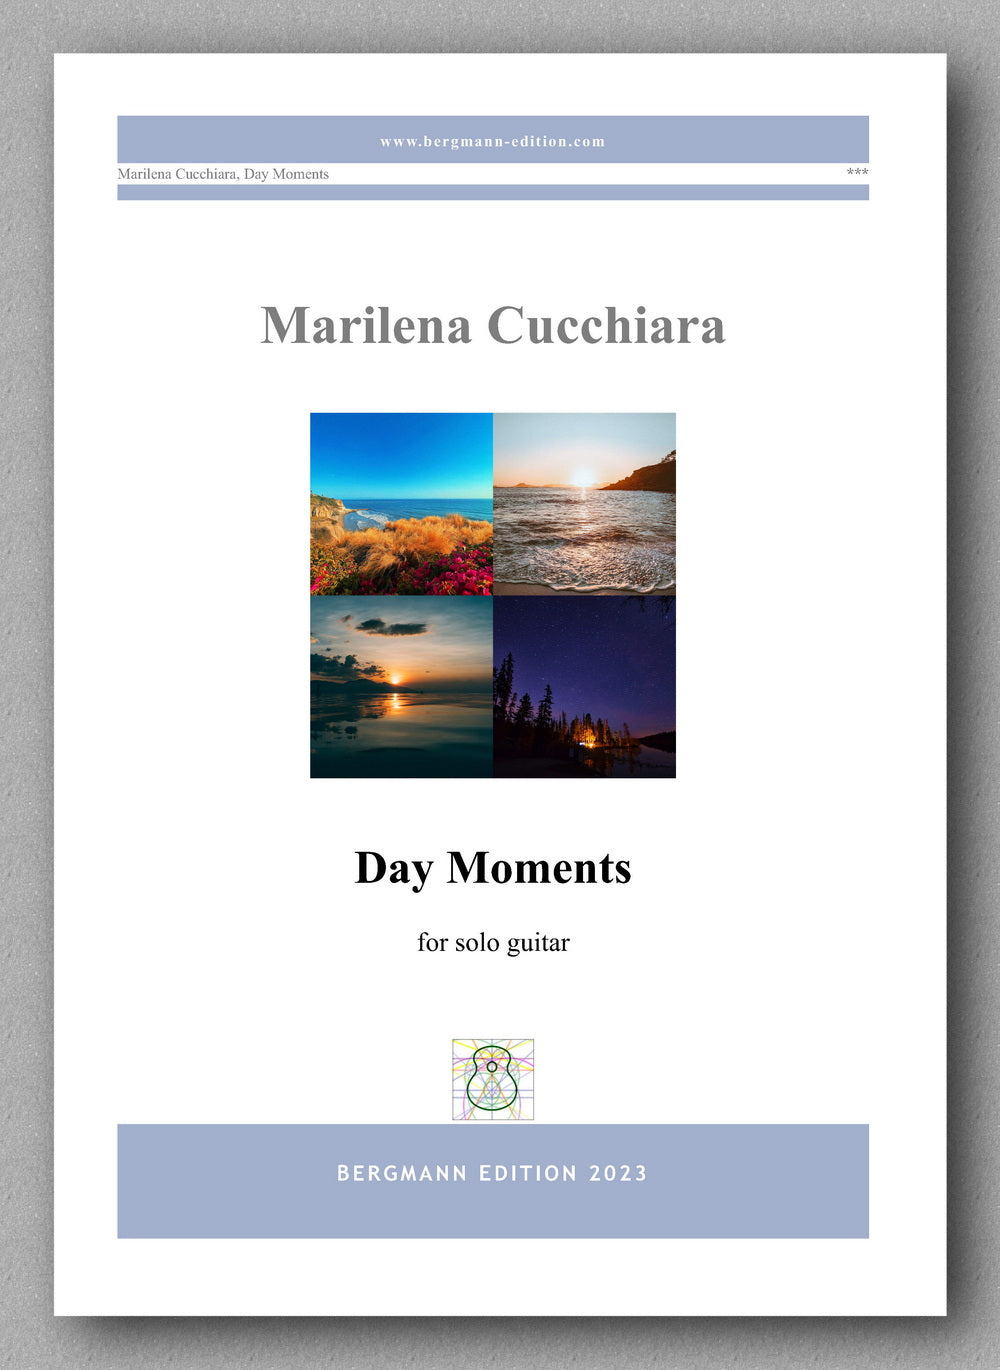 Marilena Cucchiara, Day Moments - preview of the cover